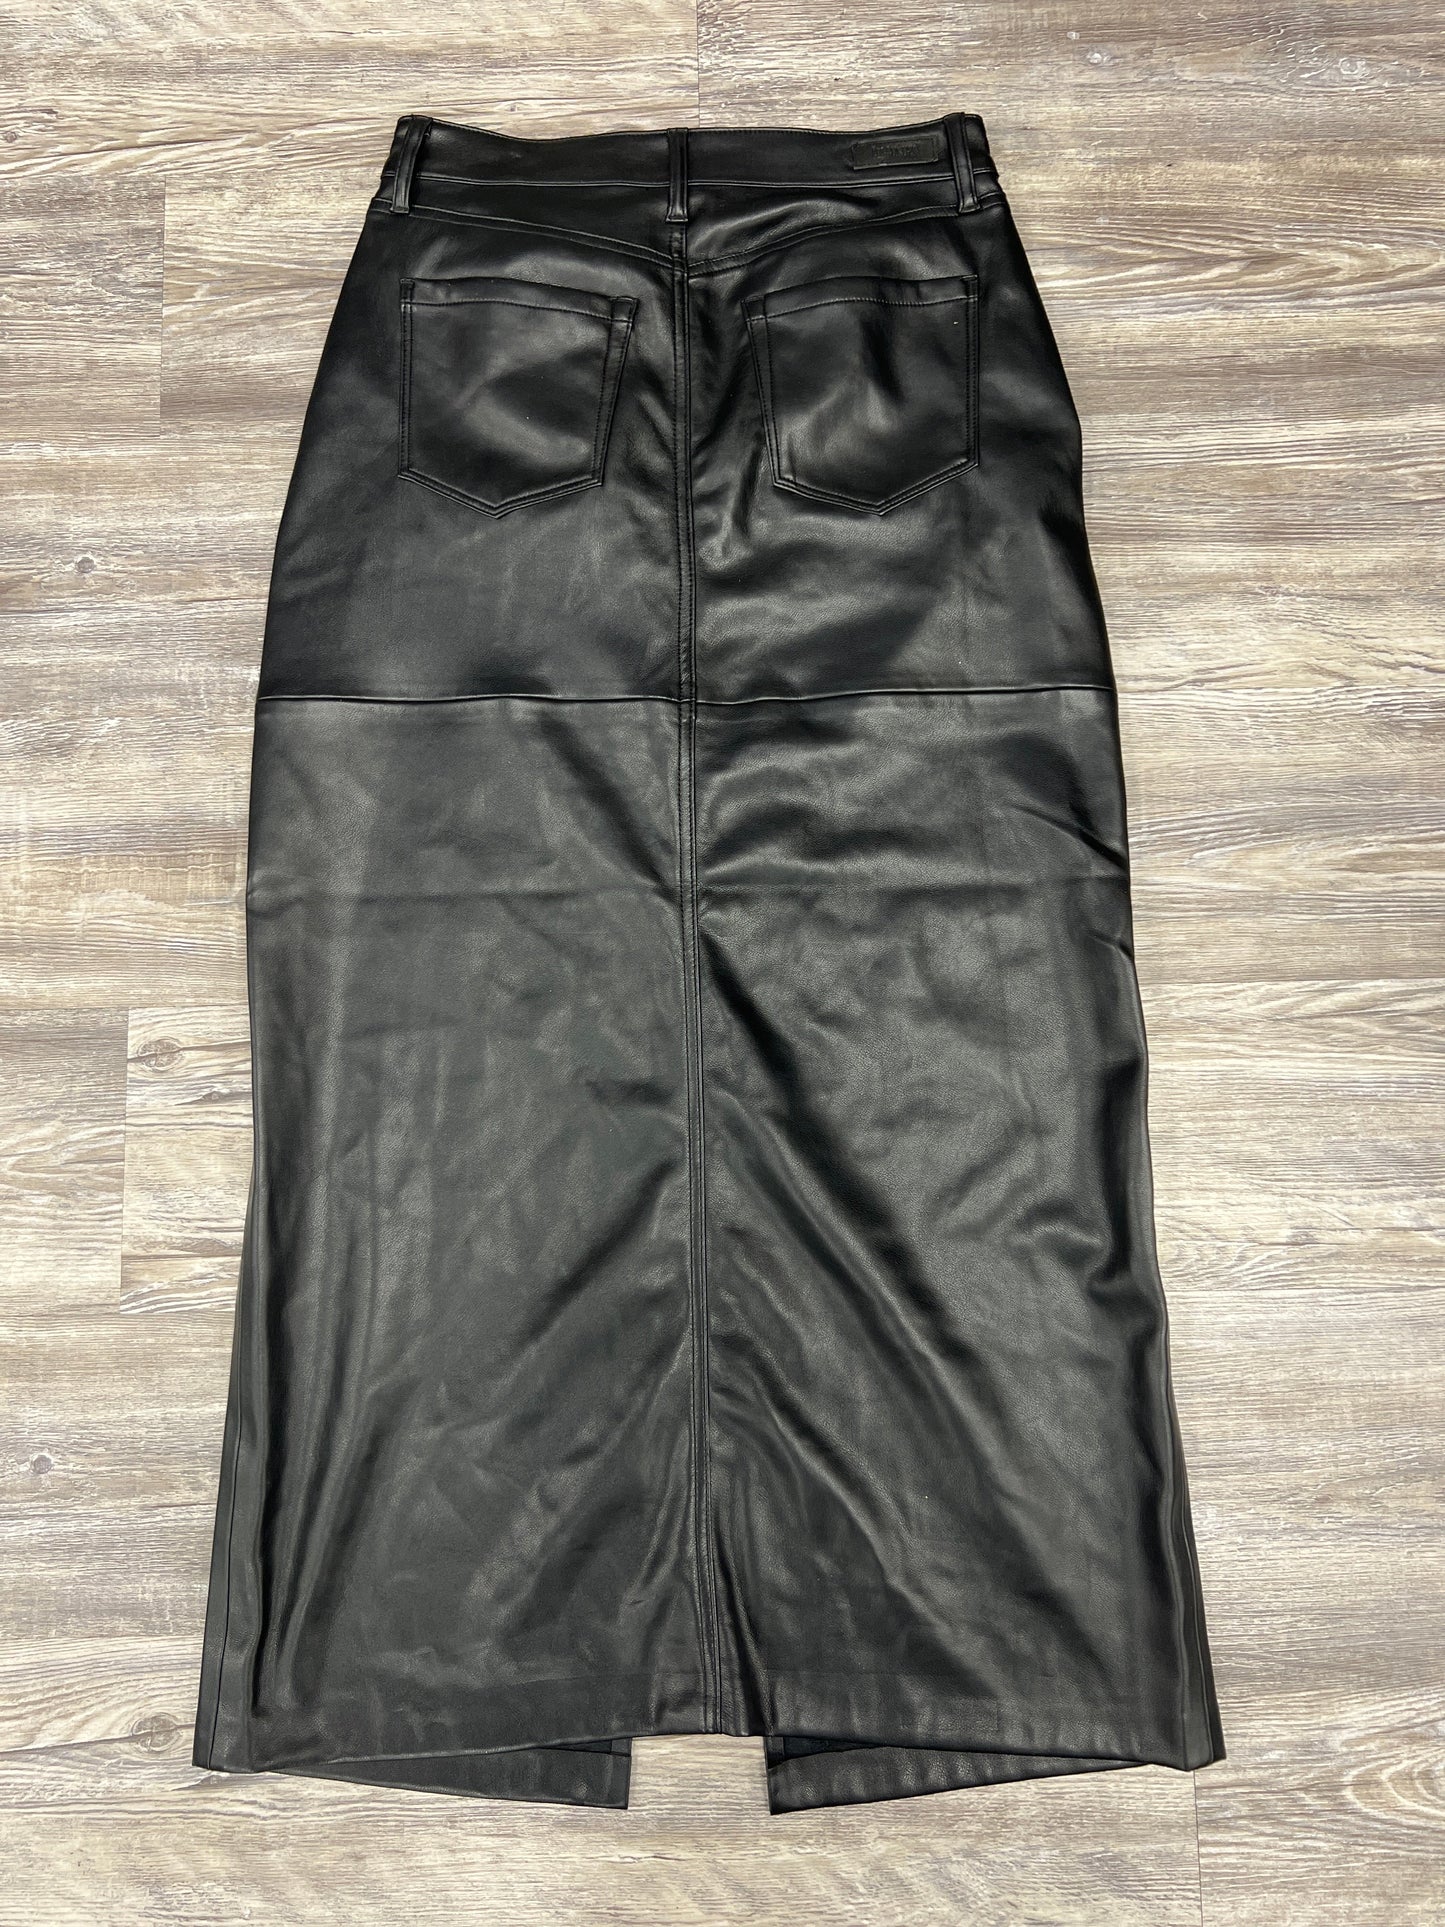 Skirt Maxi By Blanknyc  Size: 4